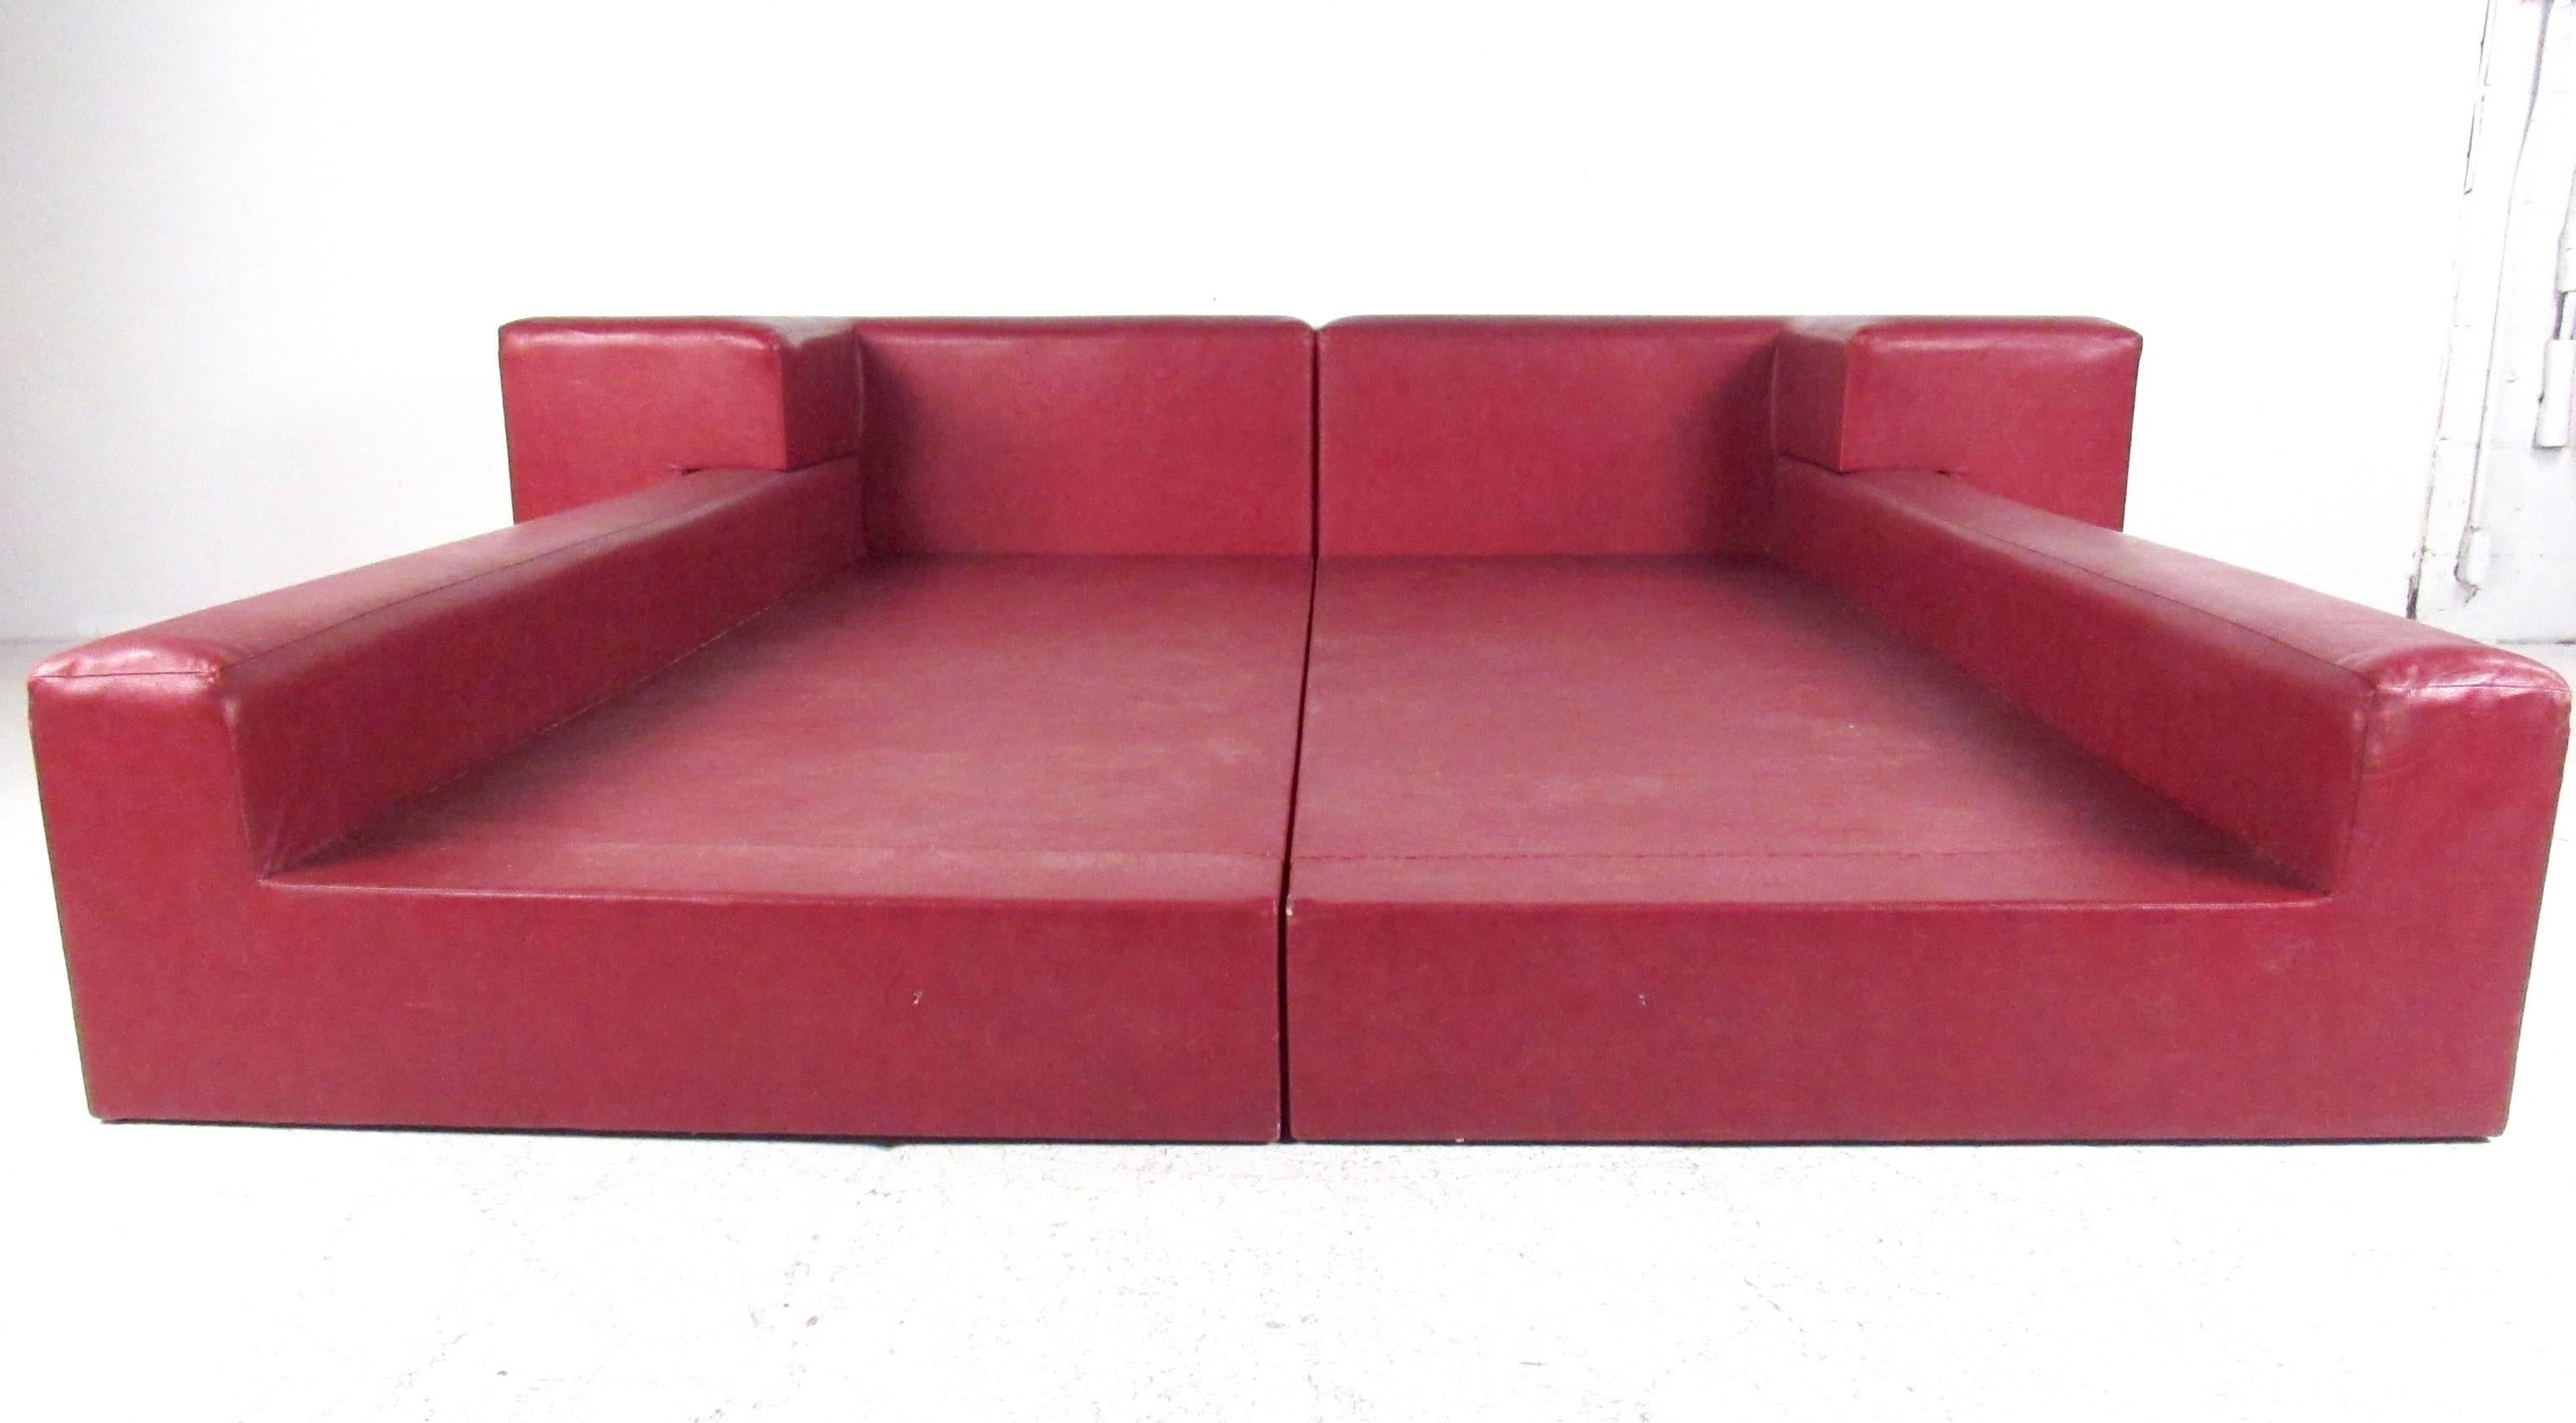 This stylish Italian Modern platform bed with headboard features vibrant red naugahyde upholstery and makes a unique impression in any interior. This padded bed frame provides striking midcentury style for any bedroom setting Please confirm item